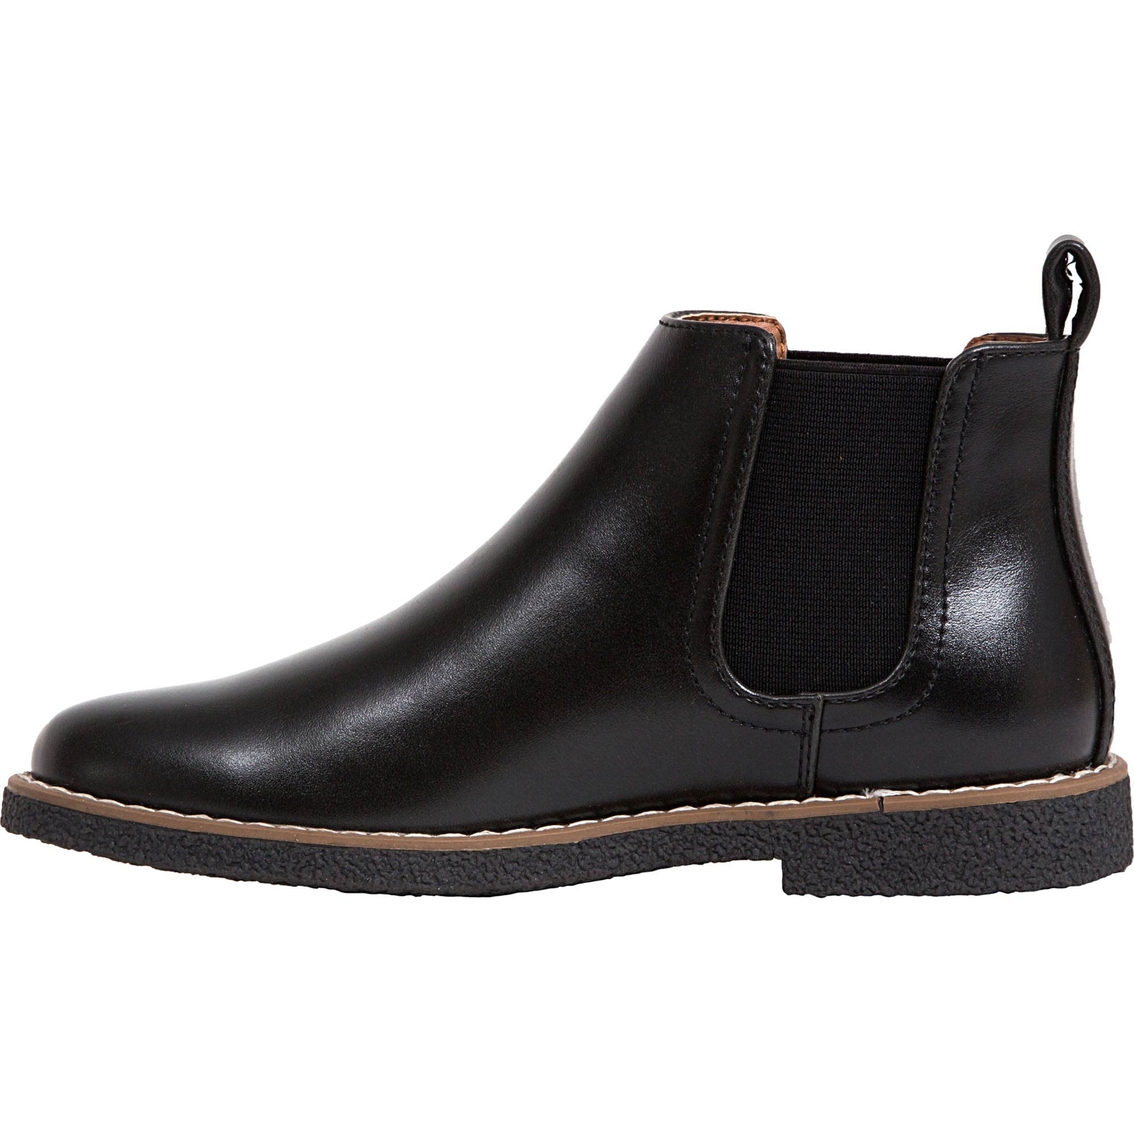 Deer Stags Boys Zane Dress Boots - Image 4 of 8